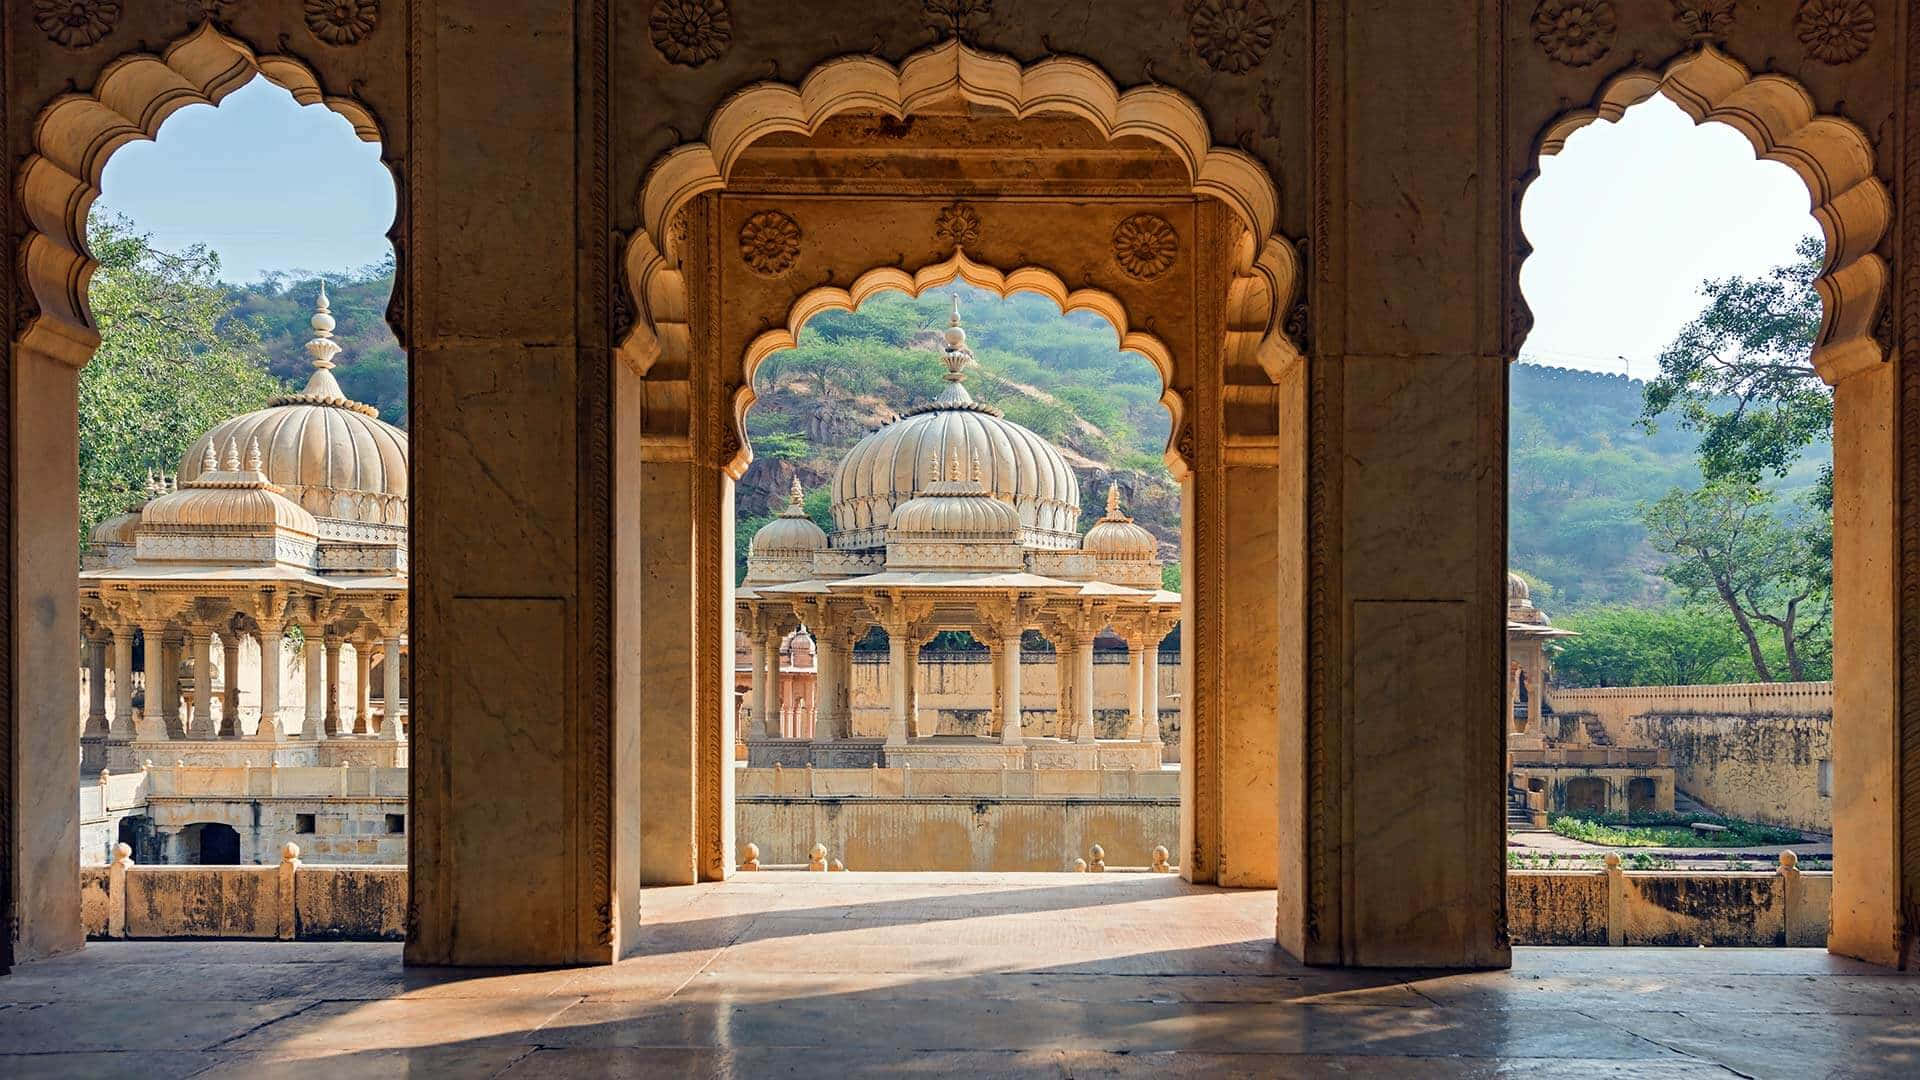 Mesmerizing Rajasthan Architecture and Landscape